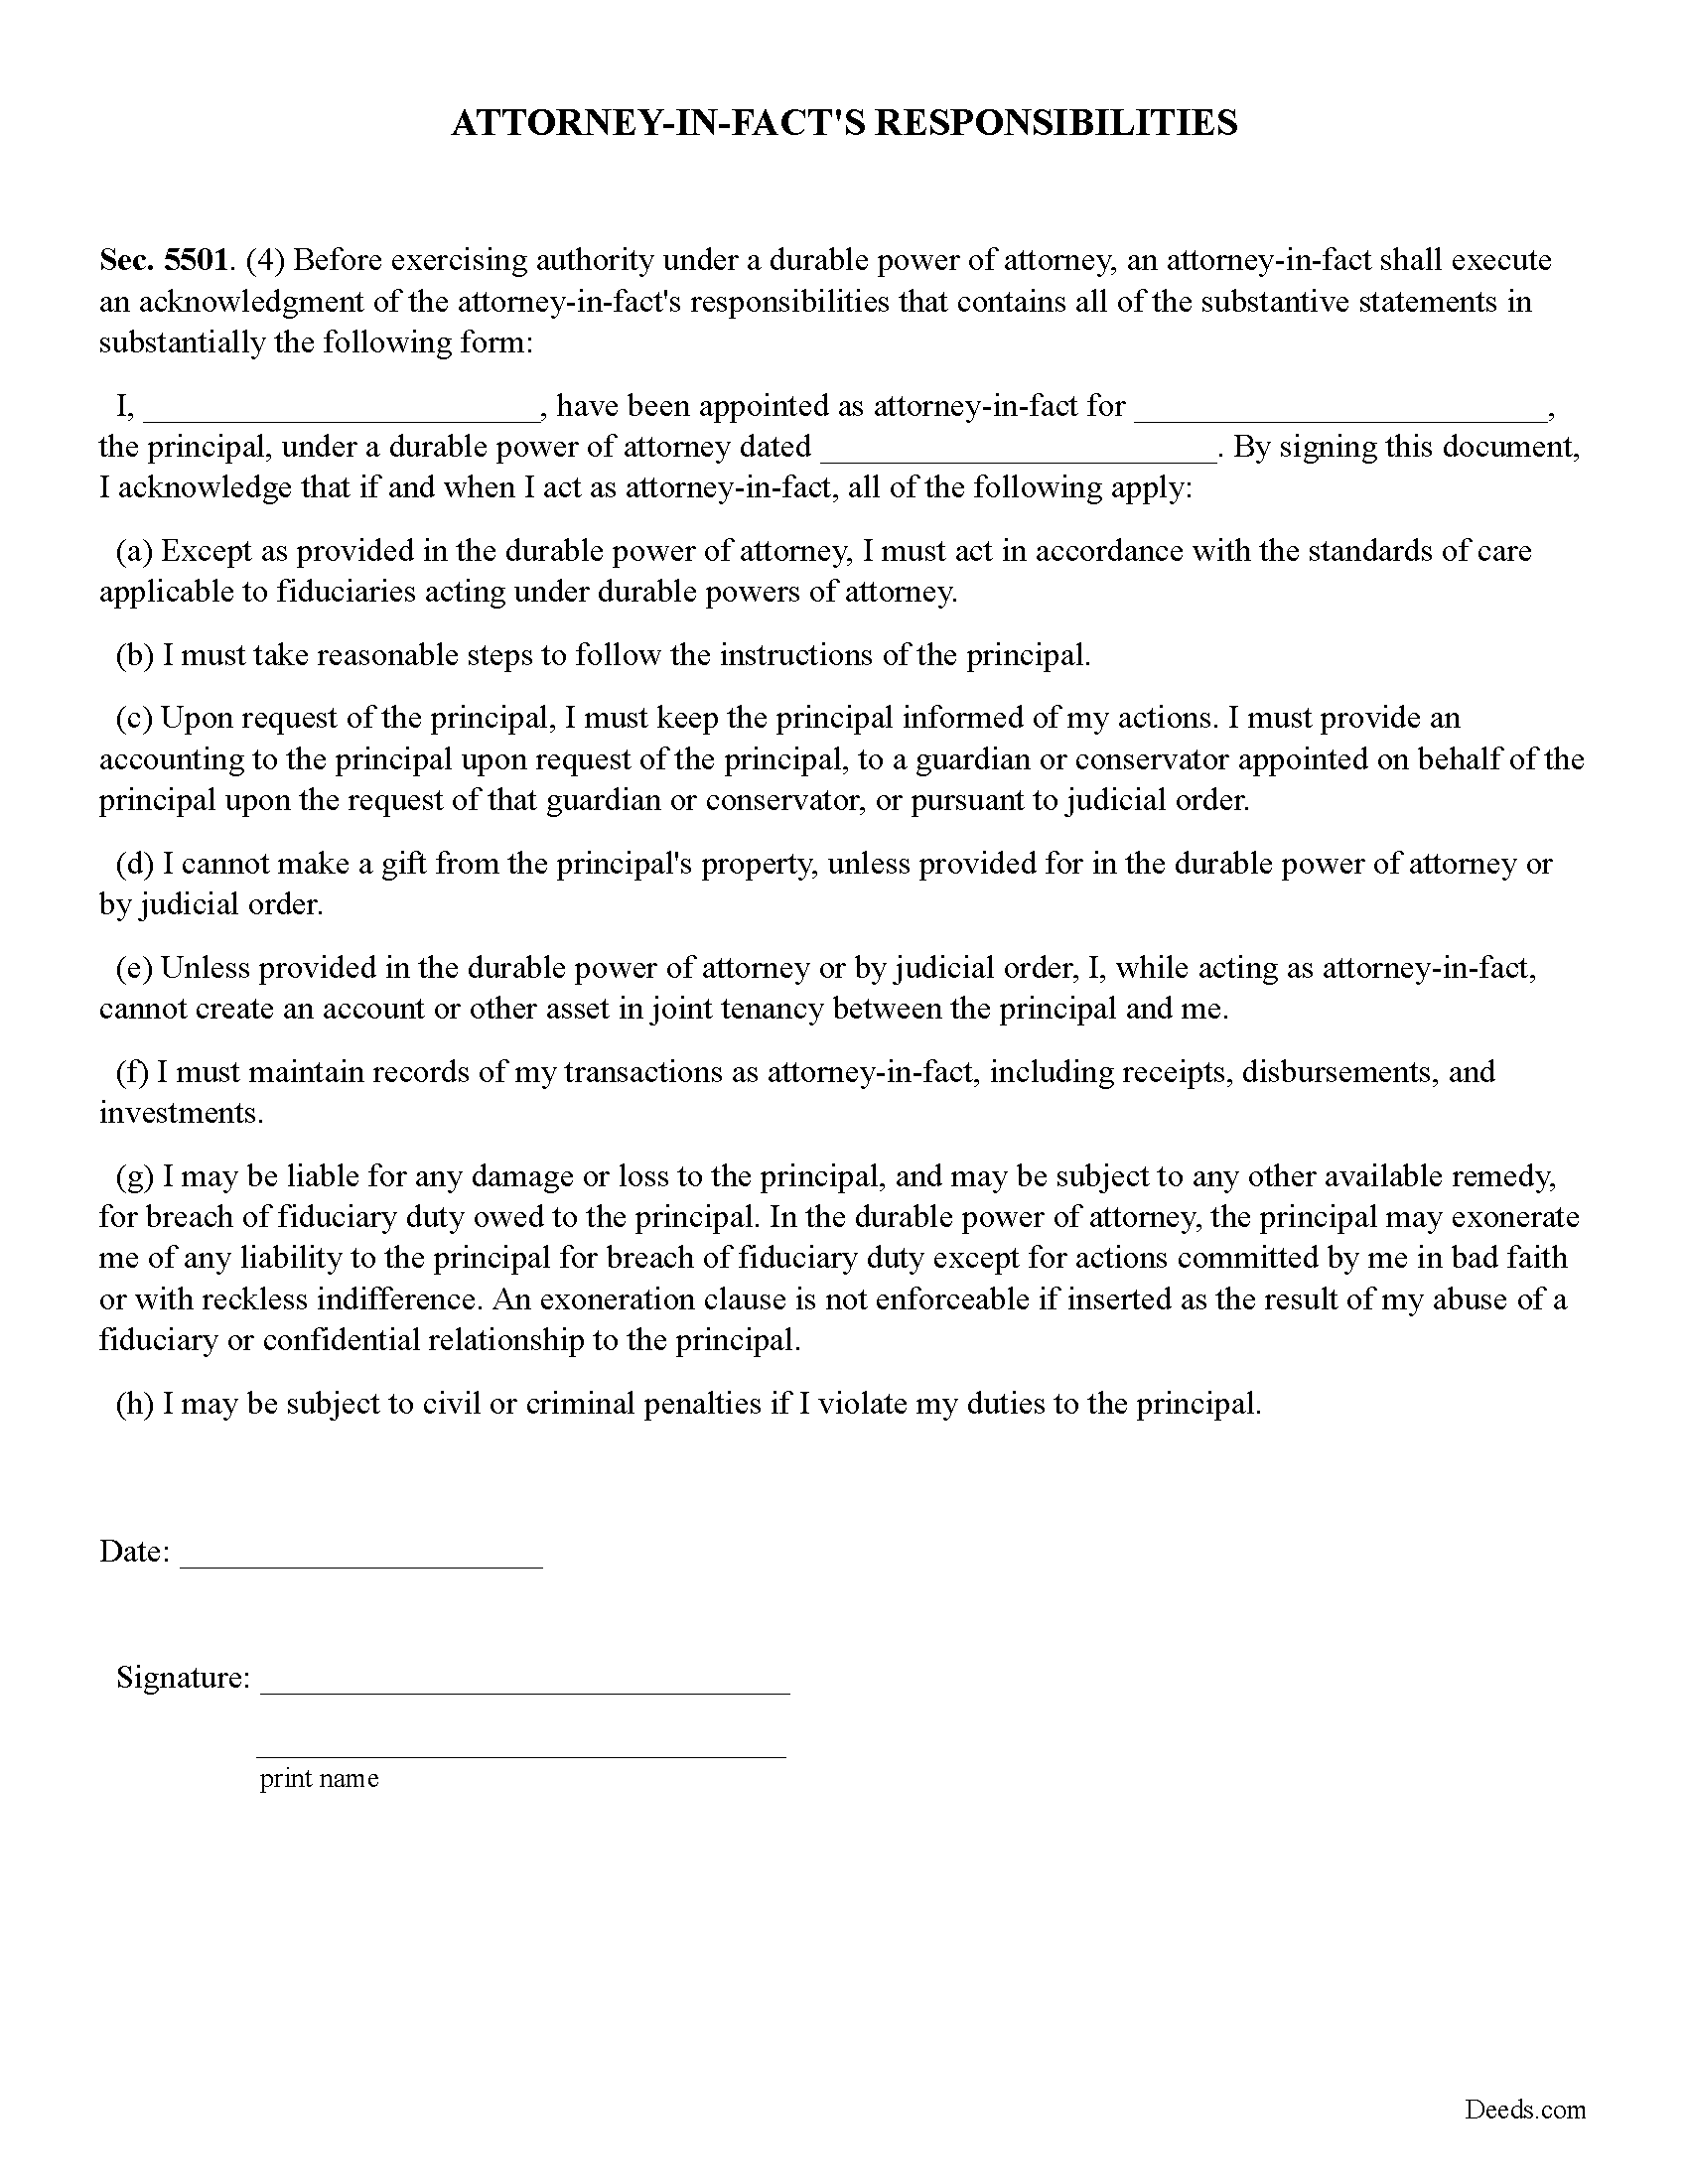 Attorney-in-Facts Responsibilities Form